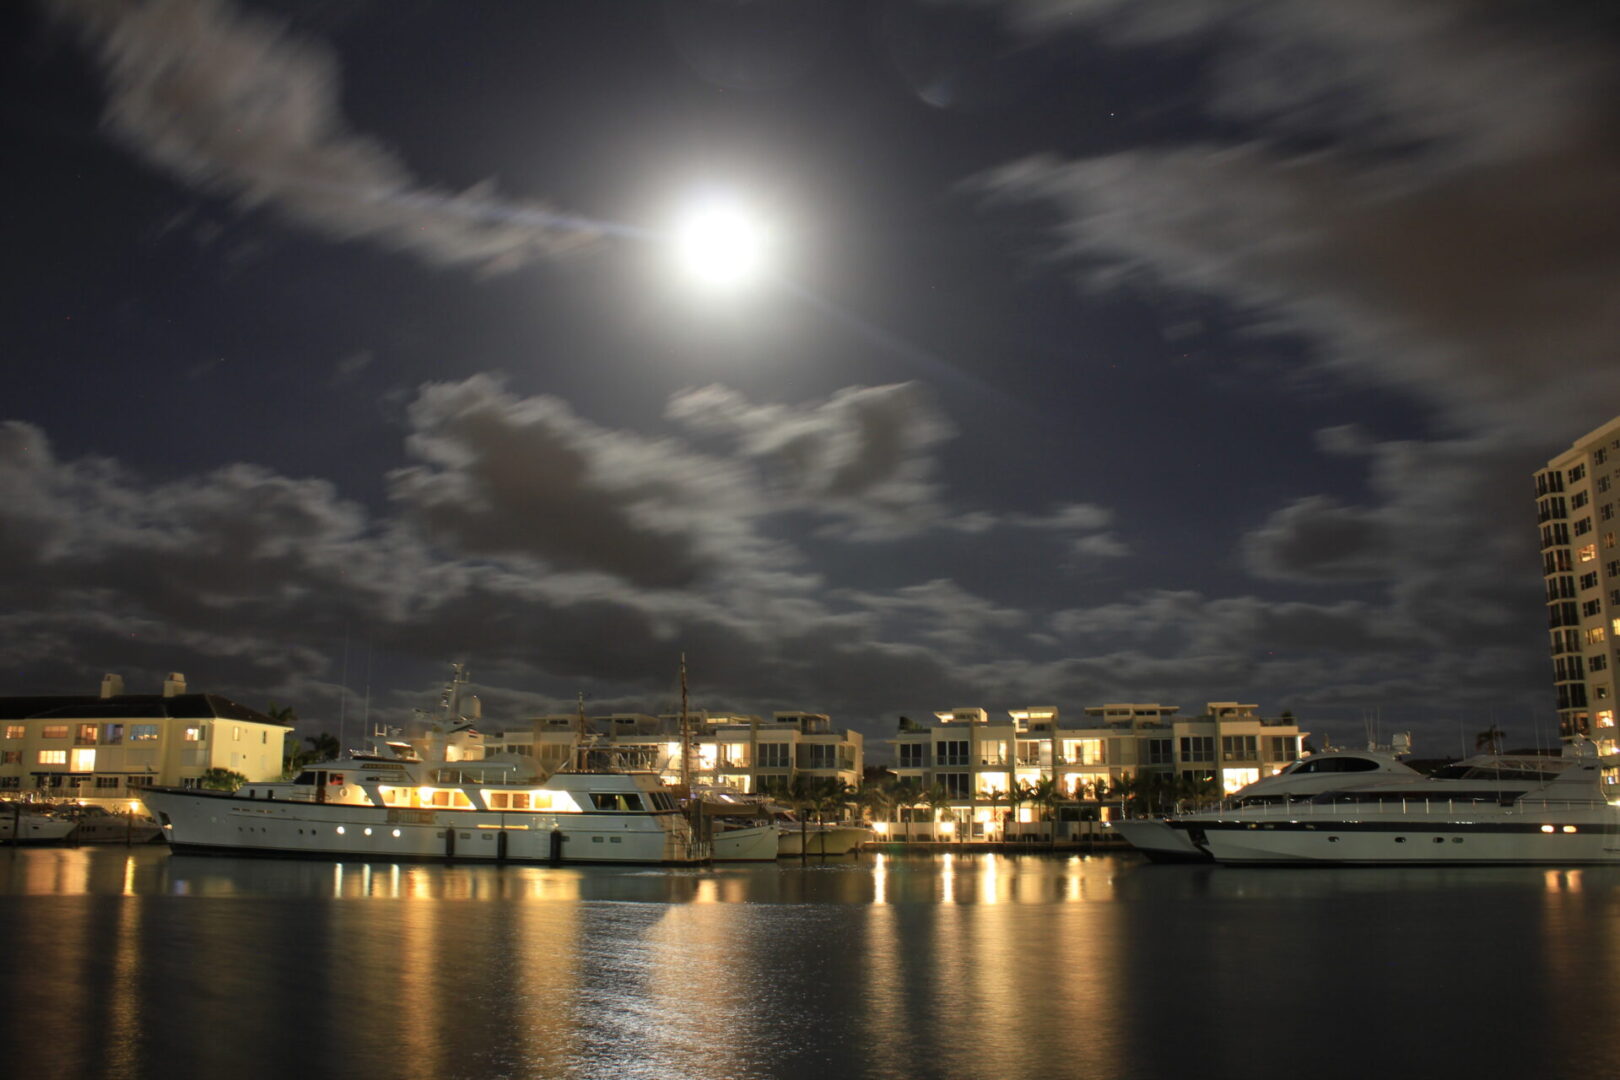 A full moon over the water and buildings.